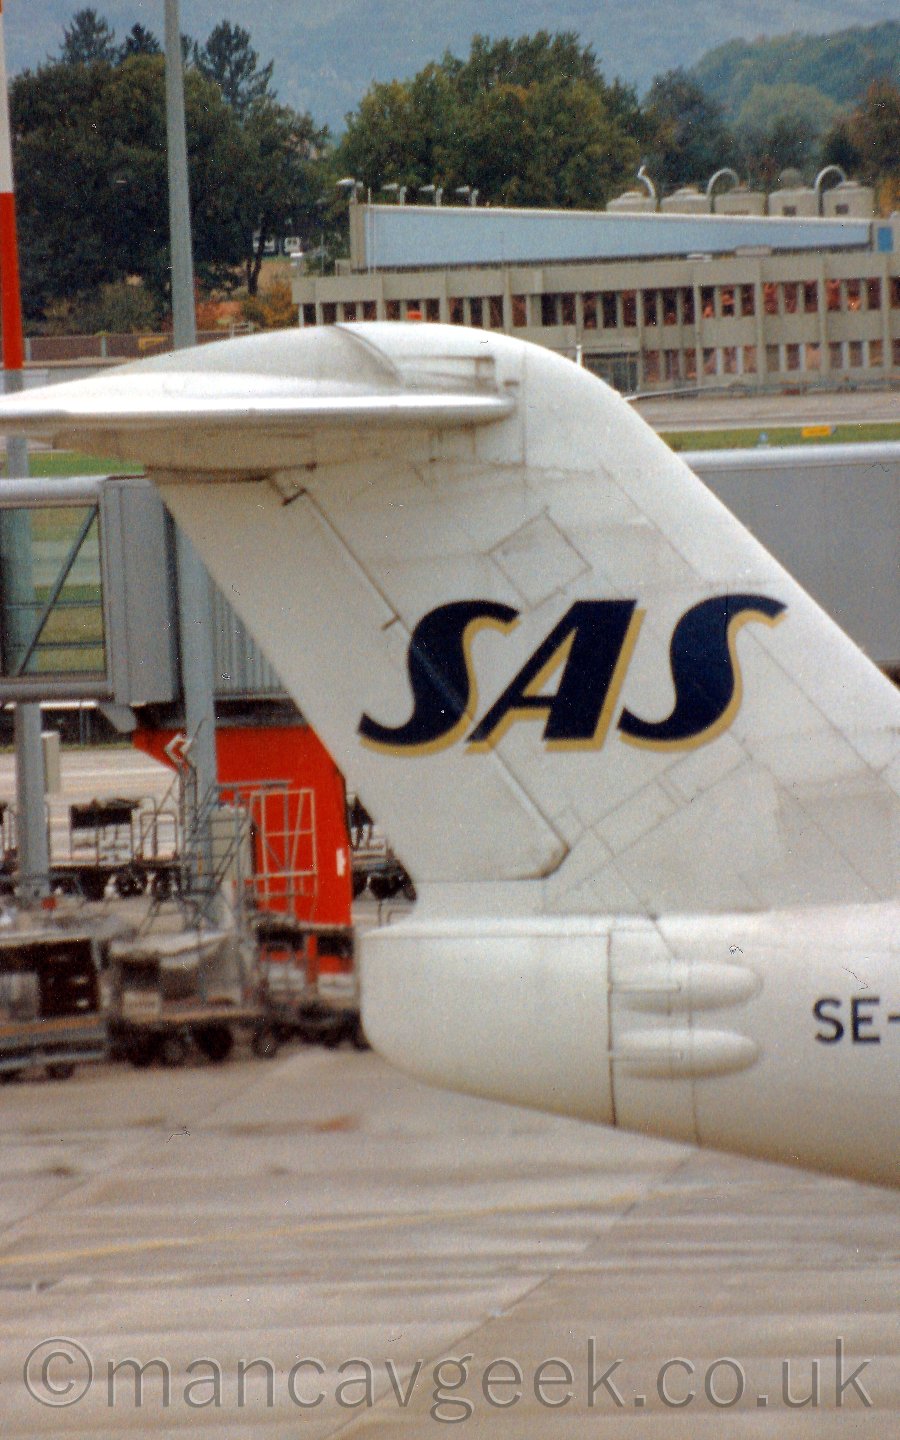 Close up of the tail of a twin engined jet airliner taxiing from left to right. The body and tail are mostly white, with dark blue "SAS" titles with a gold drop shadow on the tail. Behind, a grey airbridge is visible, not attached to anything, with a grey building with and angled blue roof in the far distance, in fron t of some trees.